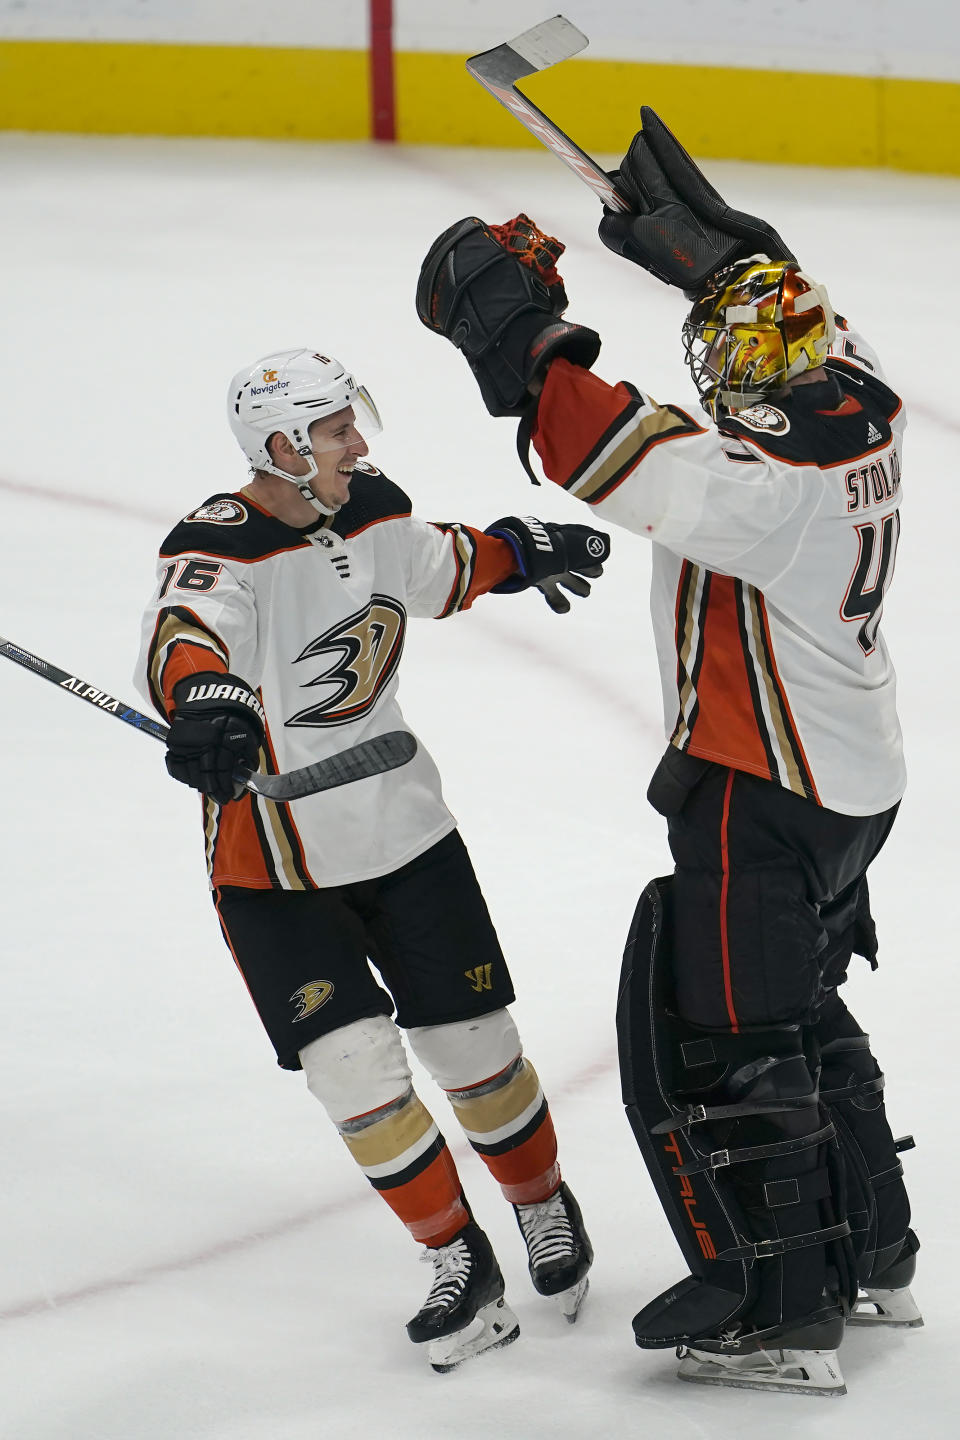 Anaheim Ducks center Ryan Strome, left, celebrates with goaltender Anthony Stolarz after the Ducks defeated the San Jose Sharks in an NHL hockey game in San Jose, Calif., Saturday, Nov. 5, 2022. The Ducks won 5-4 in a shootout. (AP Photo/Jeff Chiu)